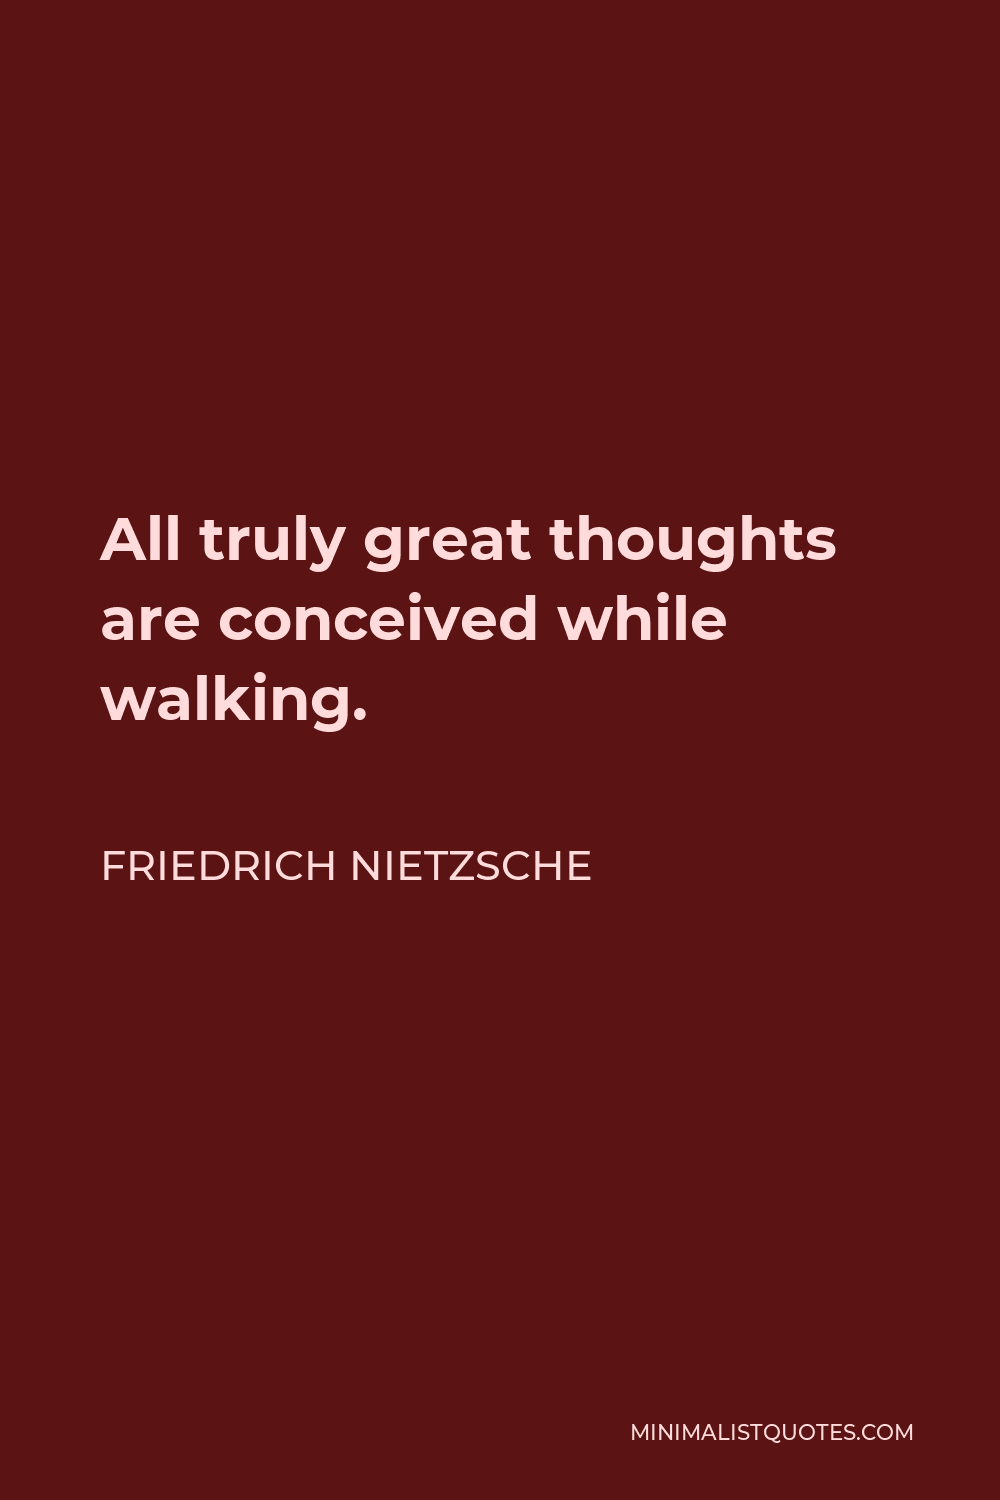 Friedrich Nietzsche Quote - All truly great thoughts are conceived while walking.